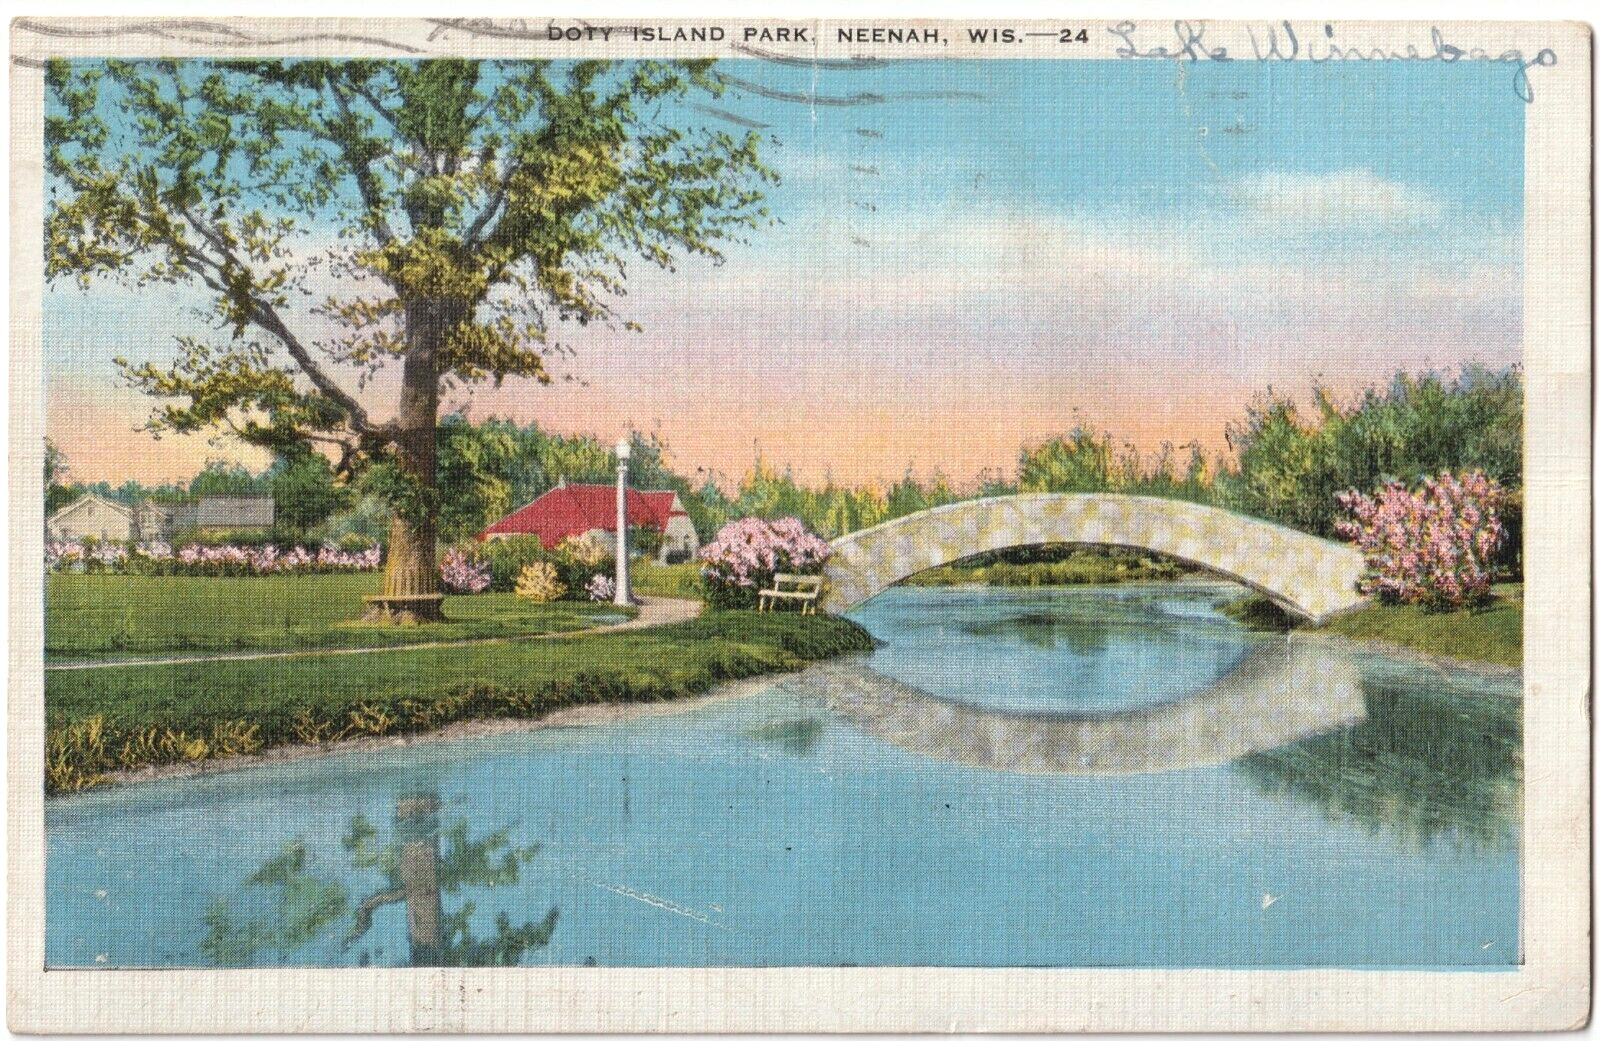 Doty Island Park in Neenah, Wisconsin WI antique 1947 posted postcard